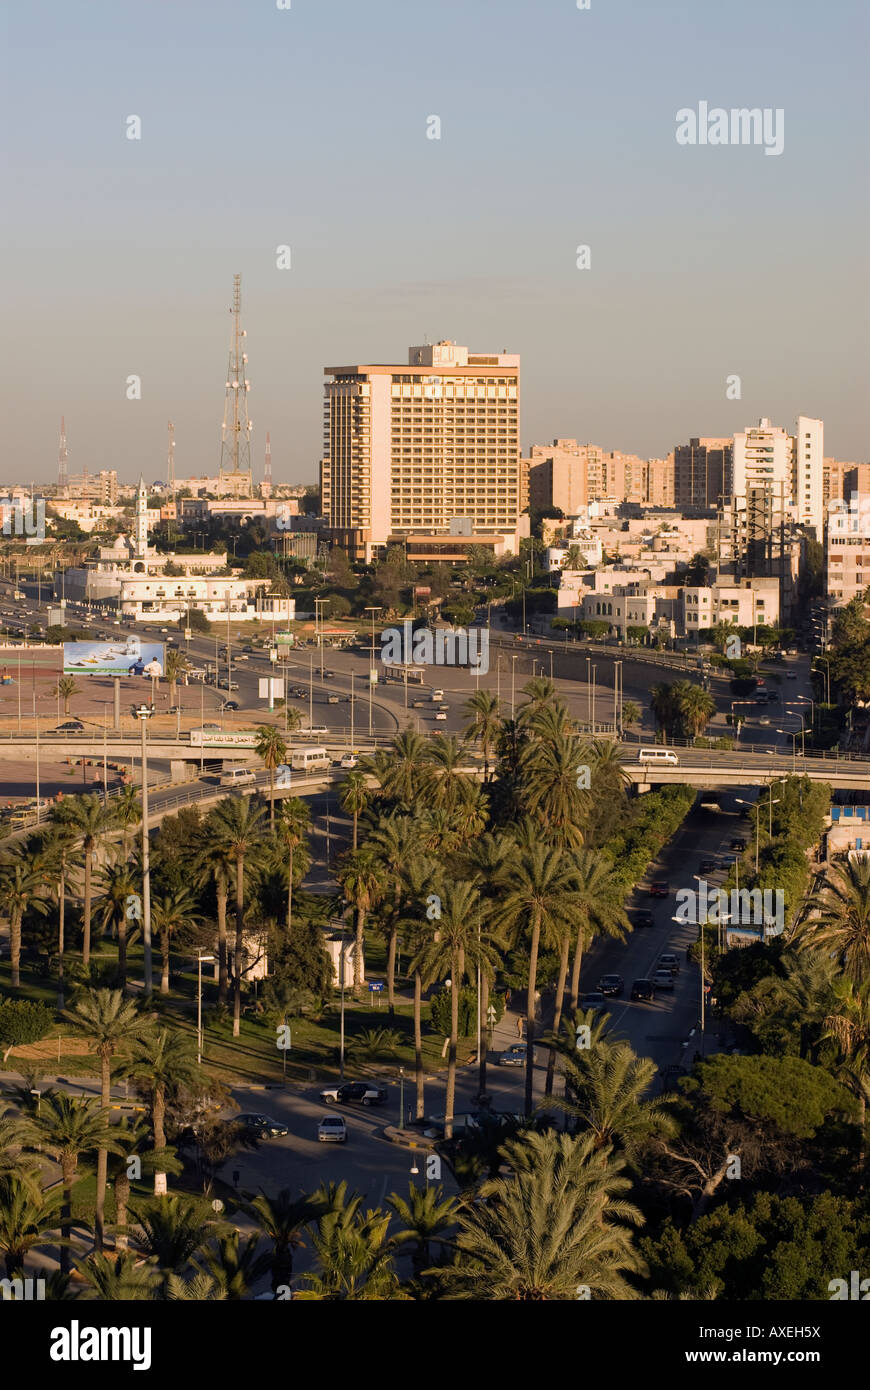 General view of the city of Tripoli Libya Stock Photo